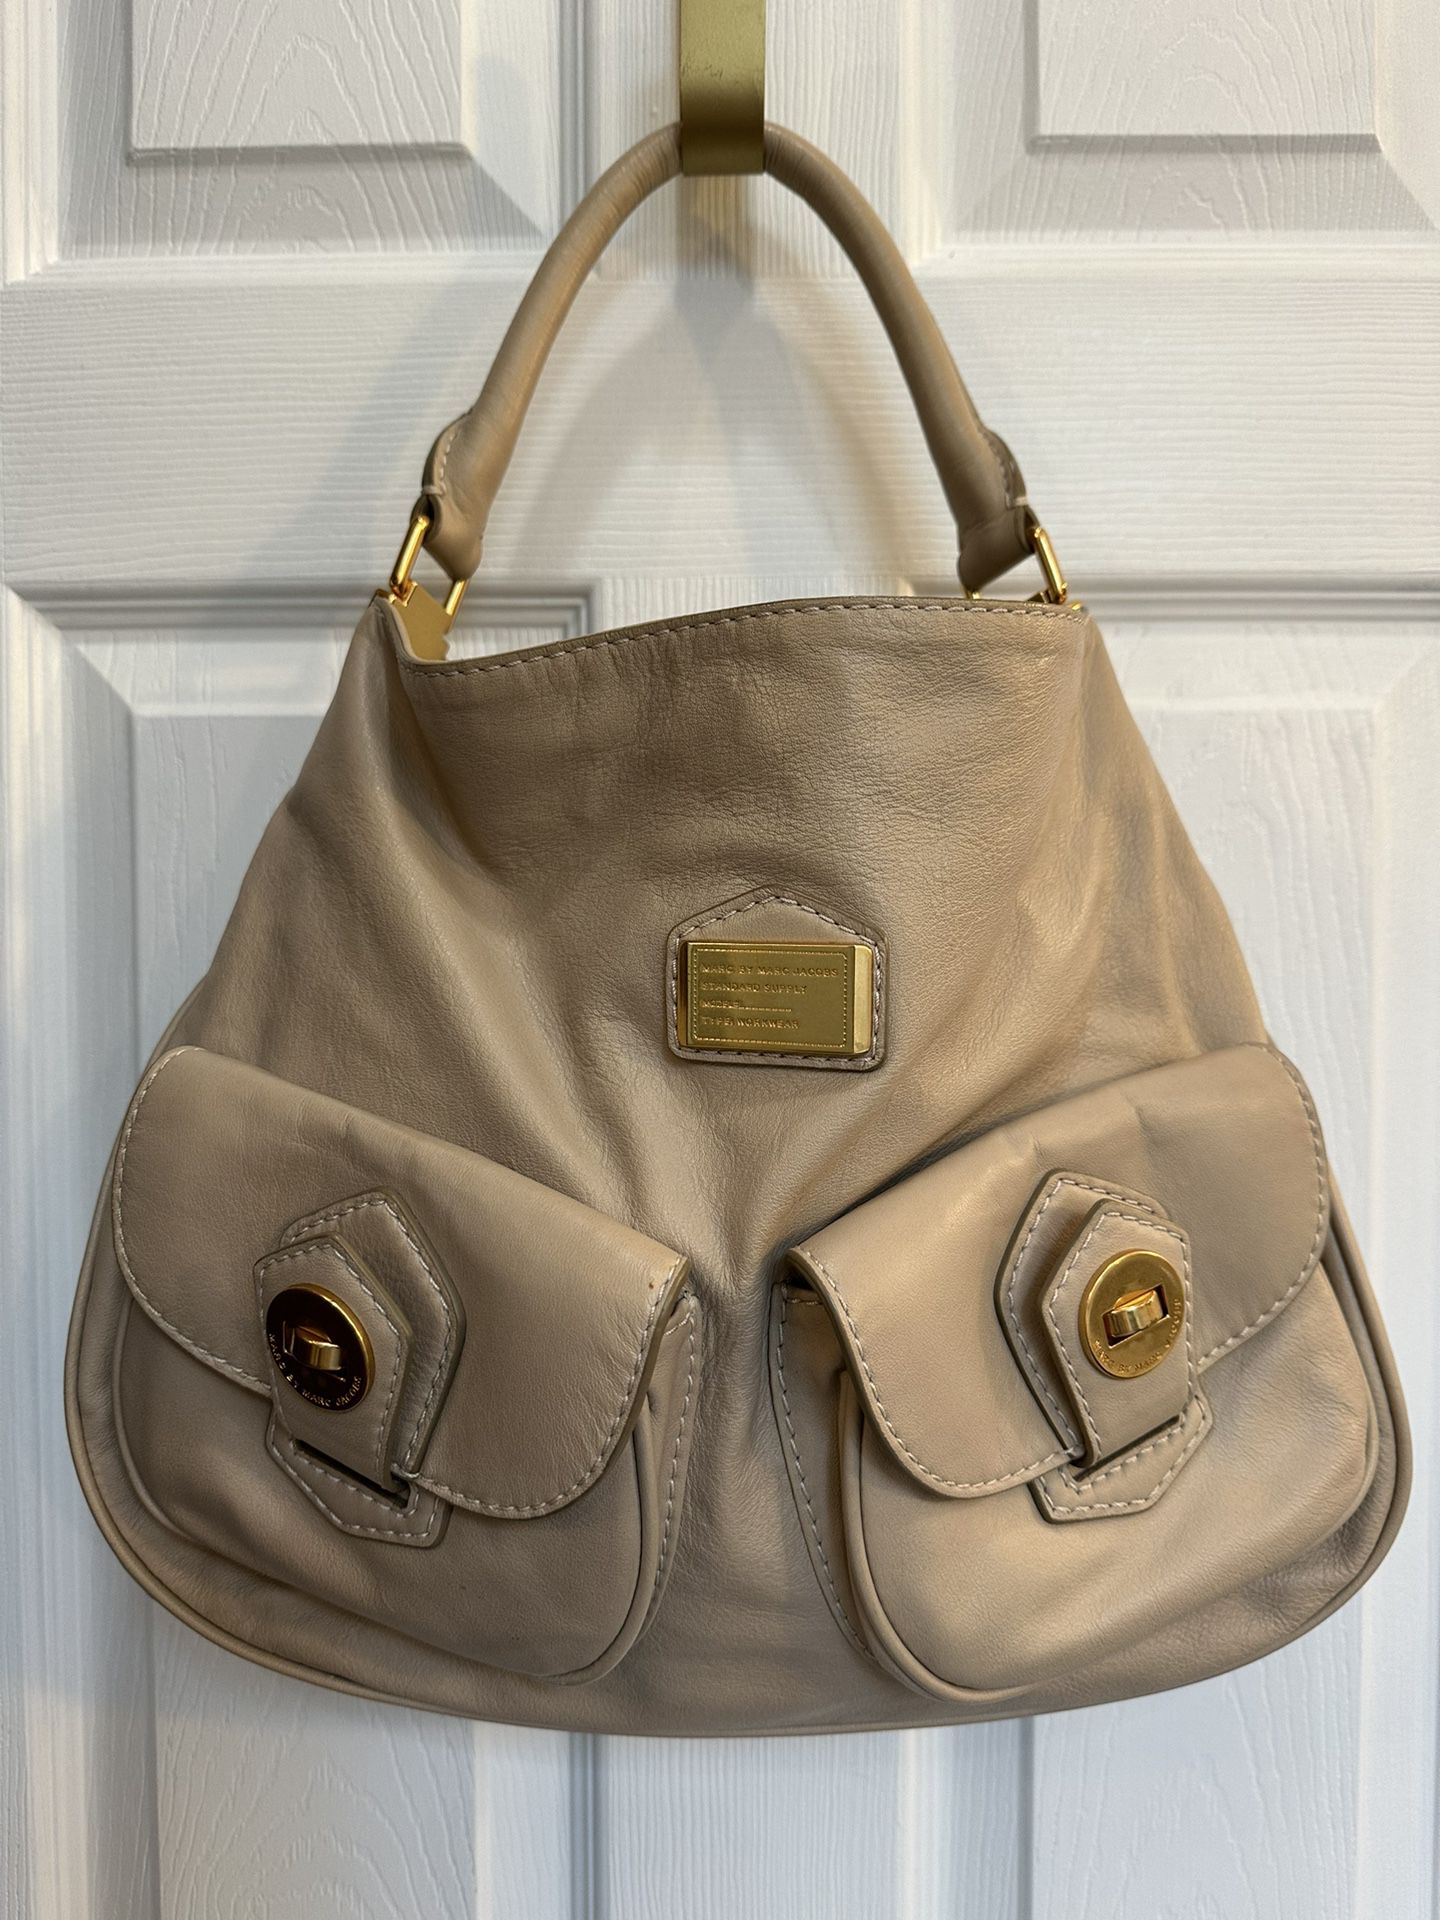 Marc Jacobs beige leather hobo bag with gold hardware. Excellent condition!